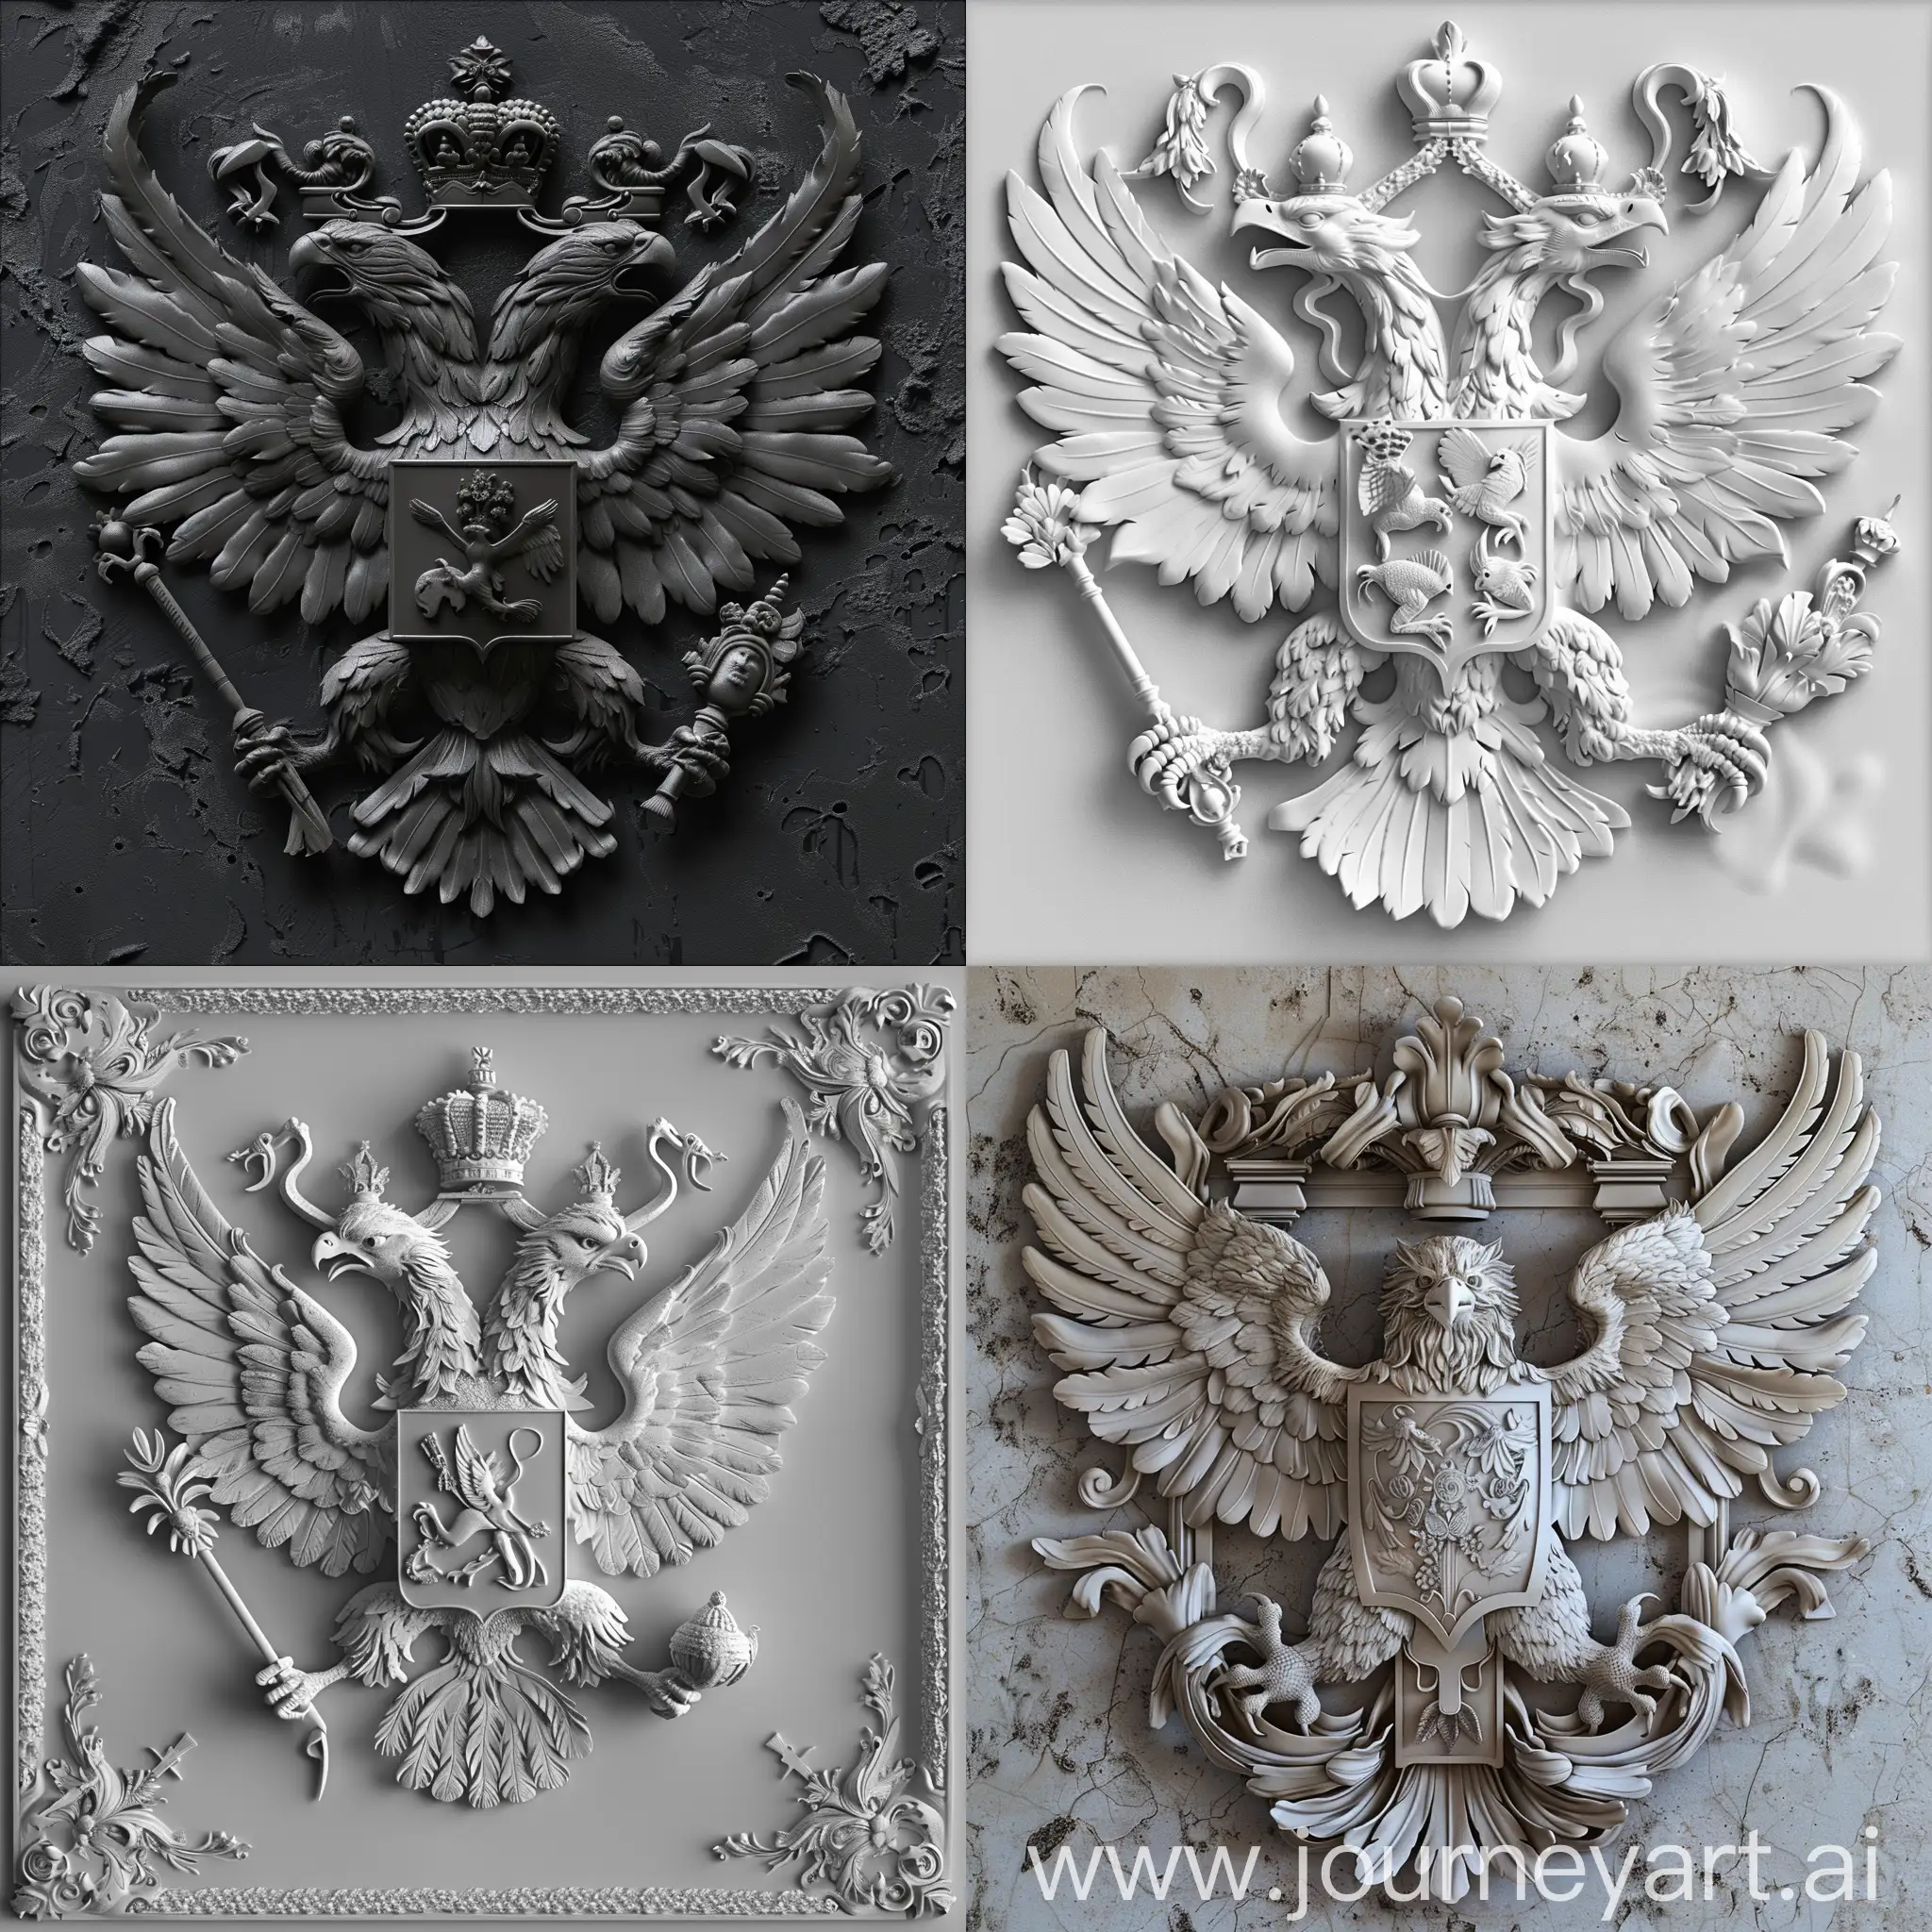 A monotone bas relief height map of a double headed eagle on a coat of arms